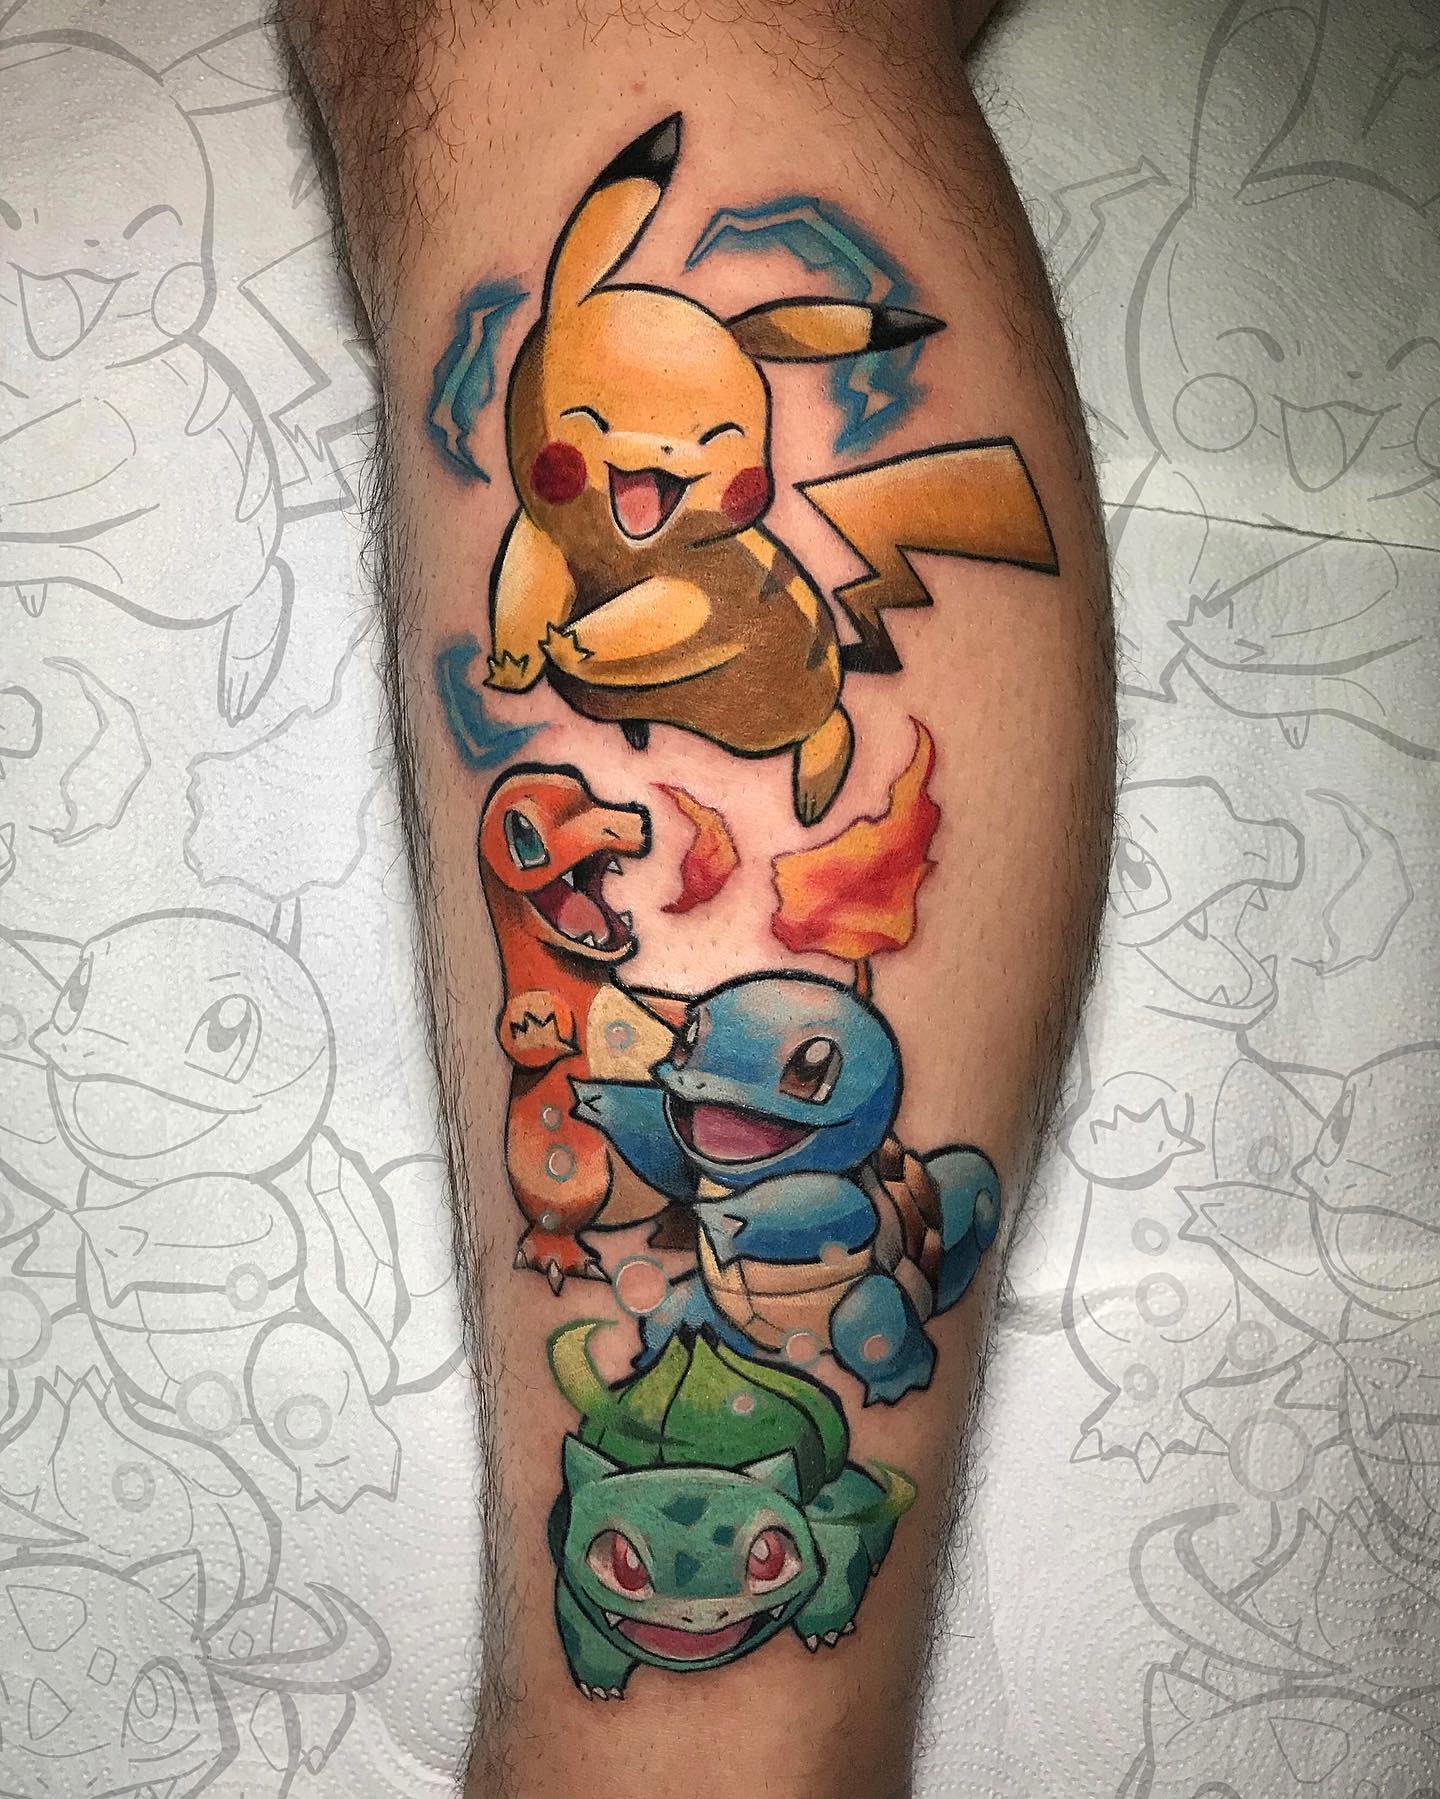 The squirtle evolution for the bro marcthesharc7 super stoked with how  this came out and glad I could hook you up bro you killed it  Instagram